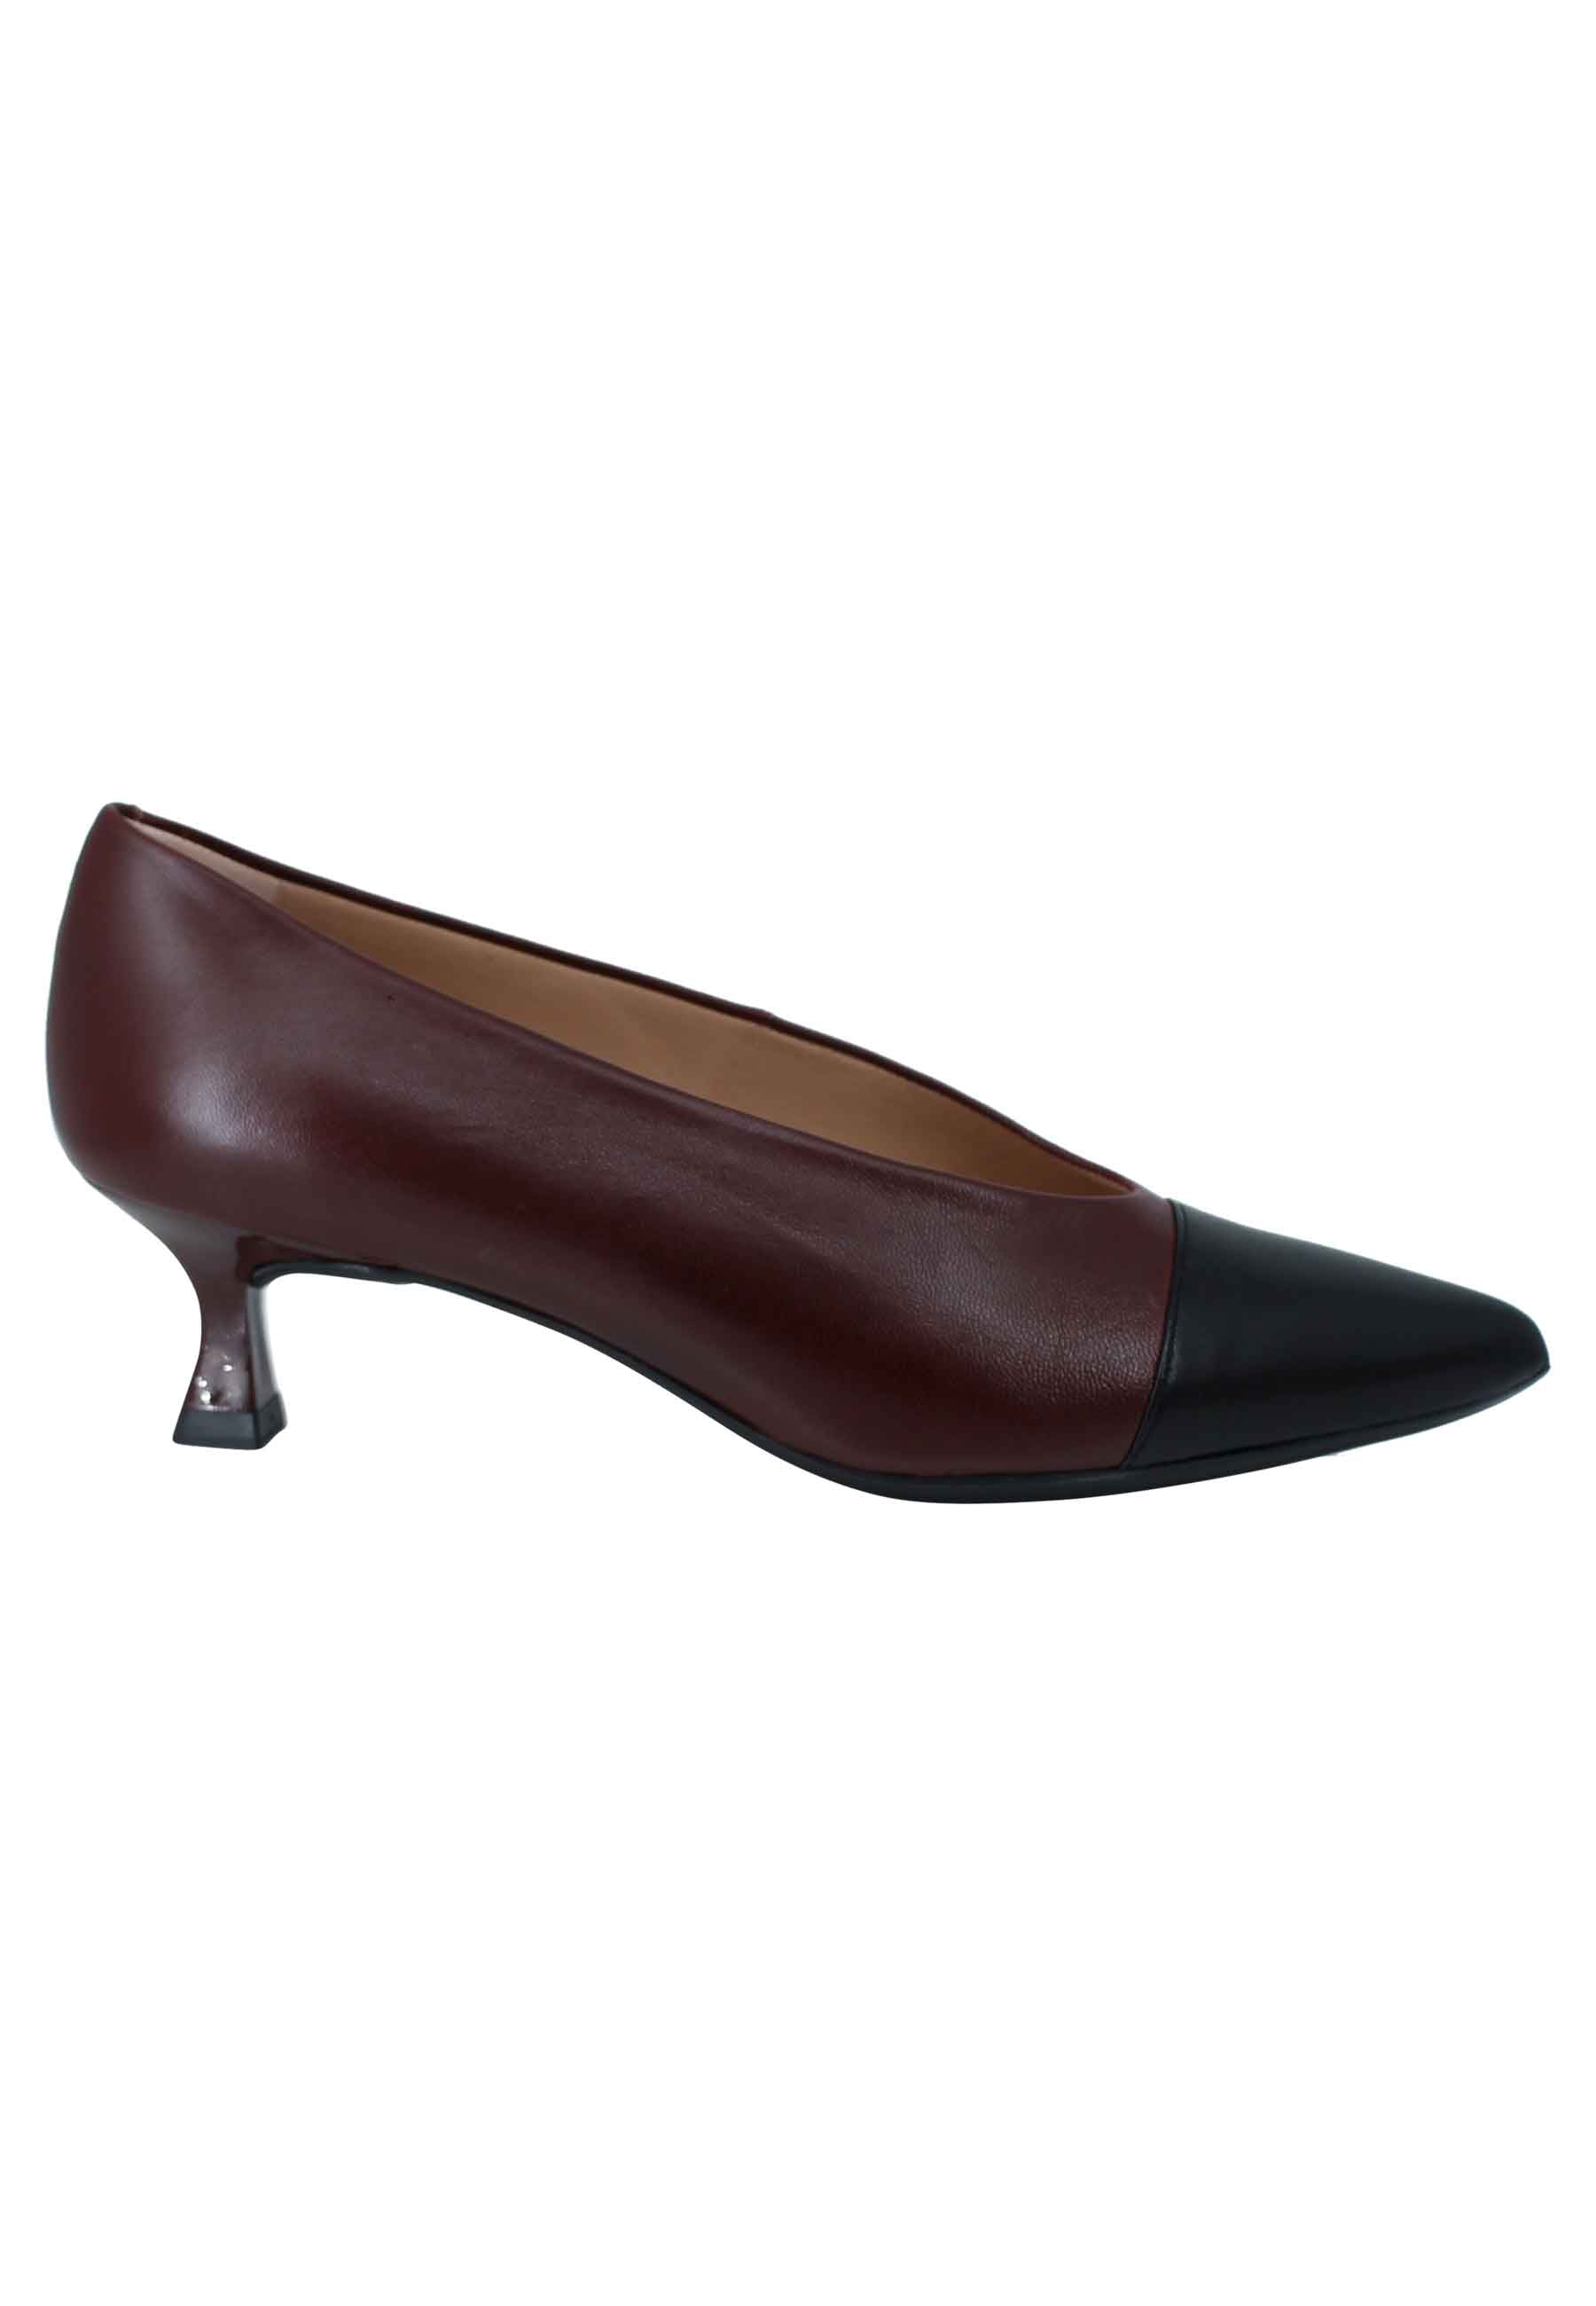 Women's décolleté in burgundy leather with low heel and high neckline